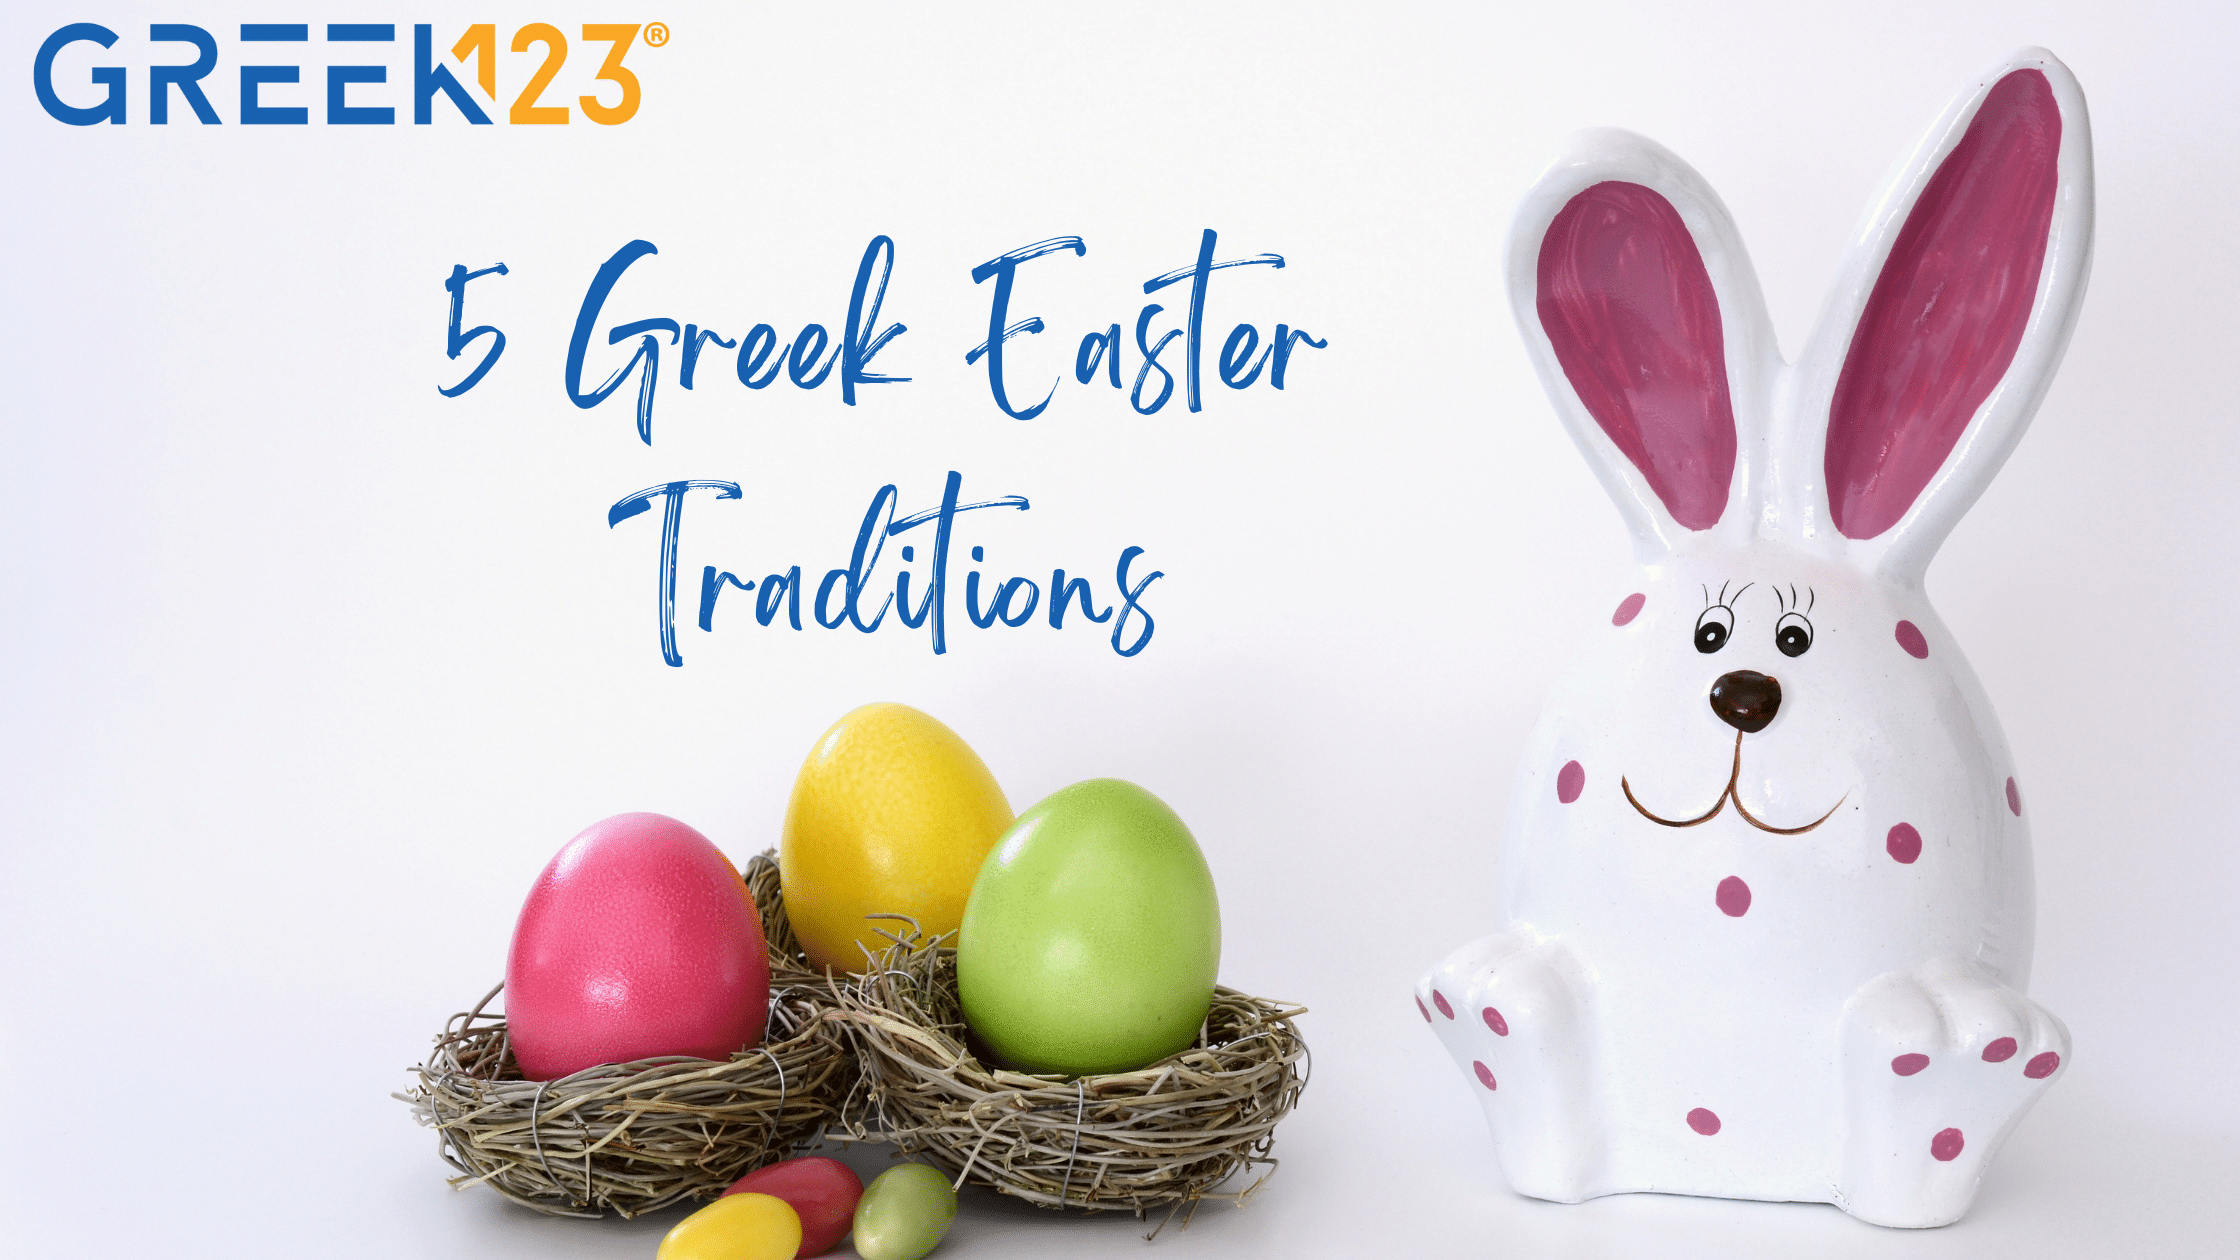 5 Greek Easter Traditions